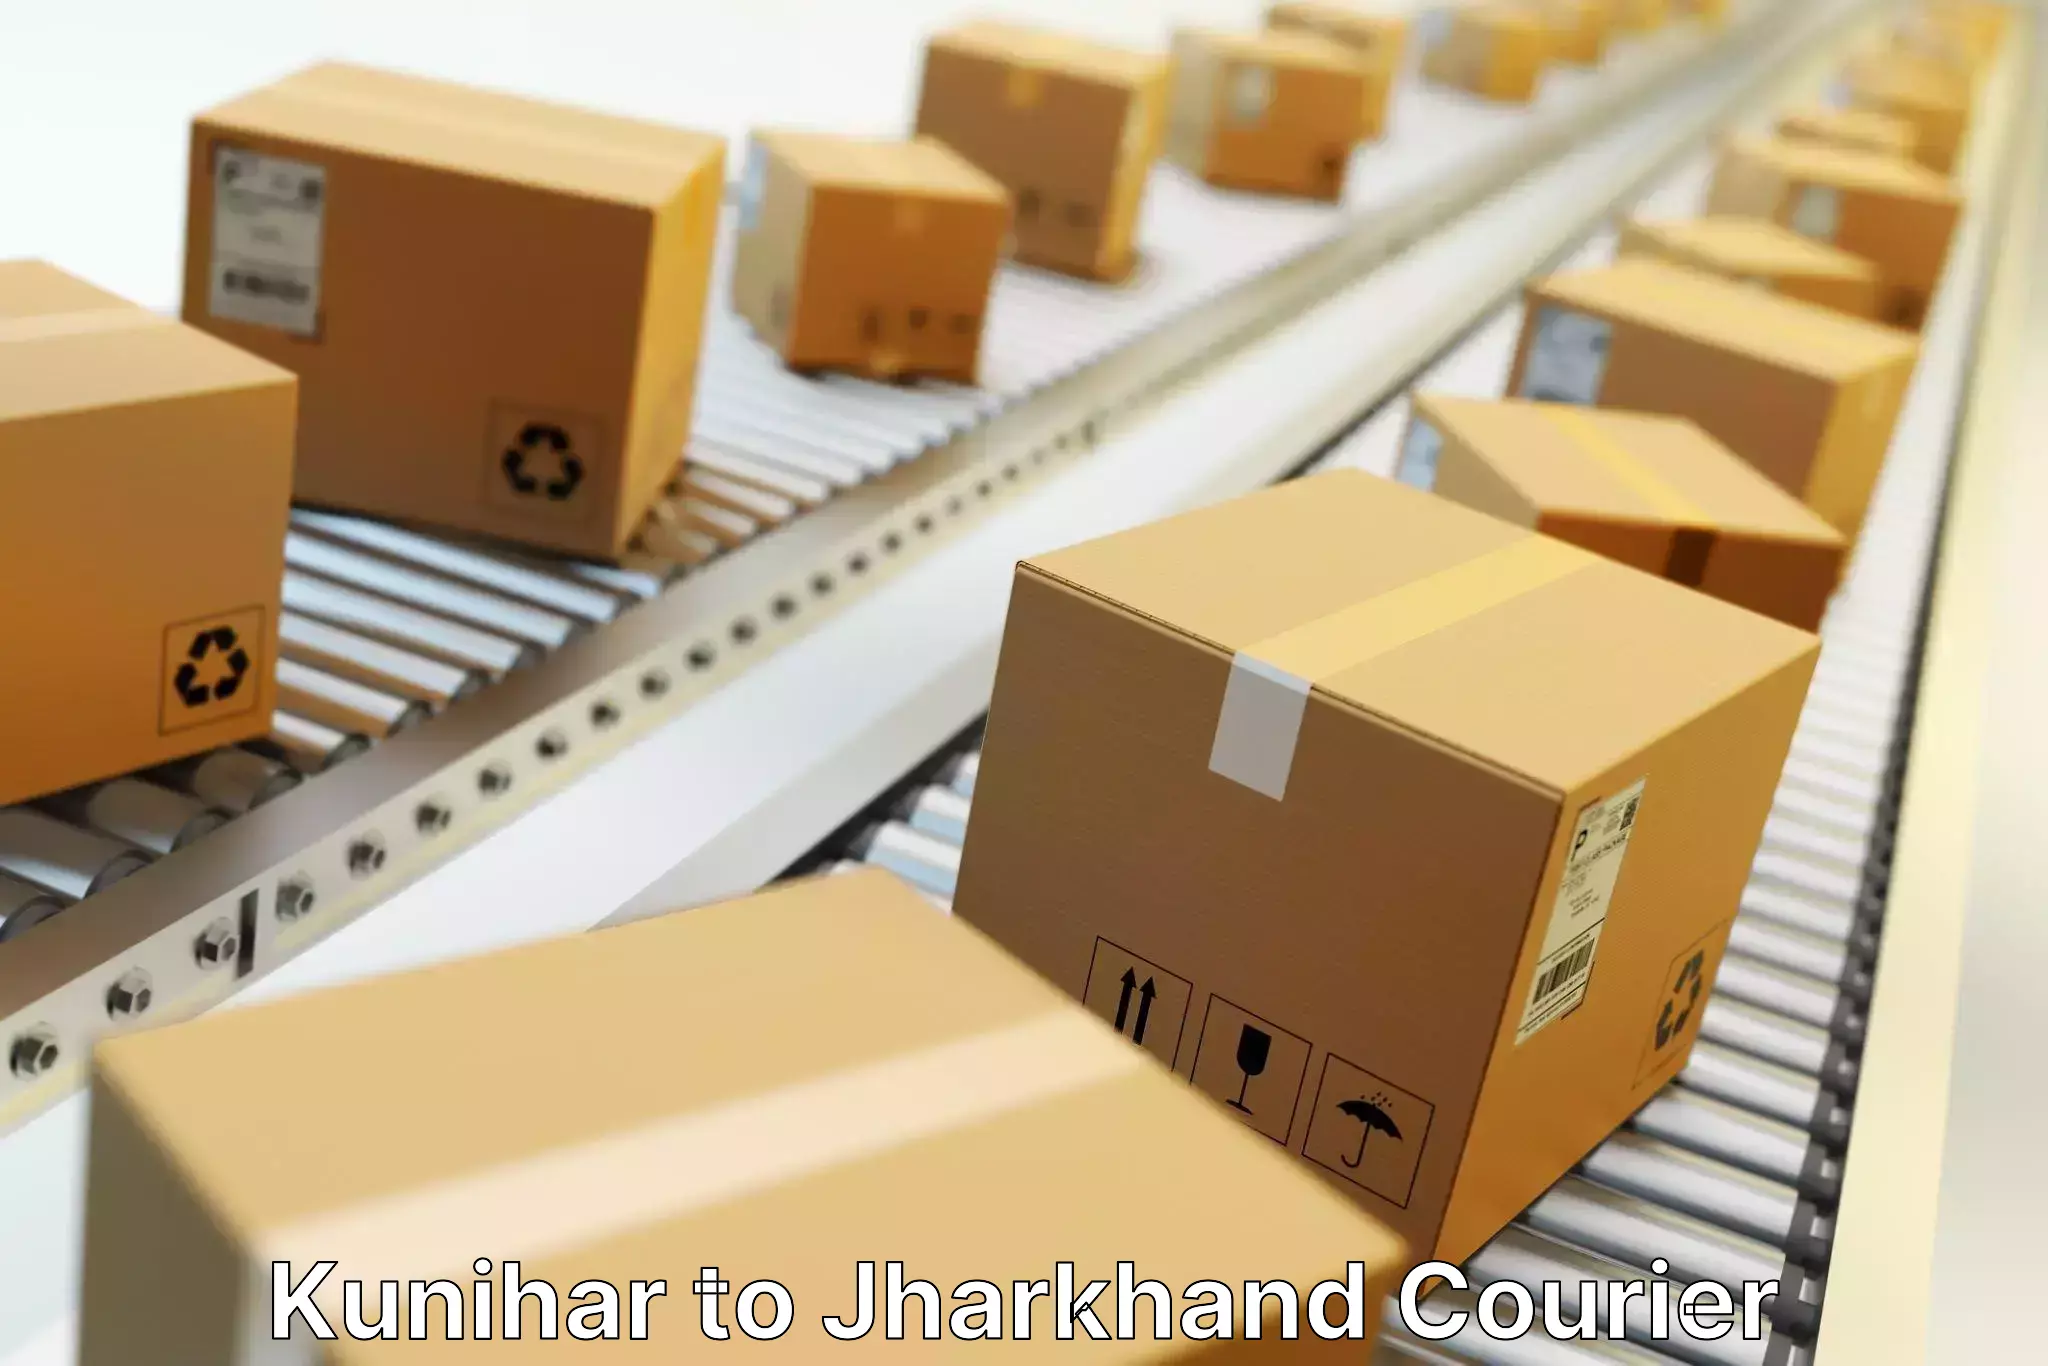 Customizable delivery plans Kunihar to Jharkhand